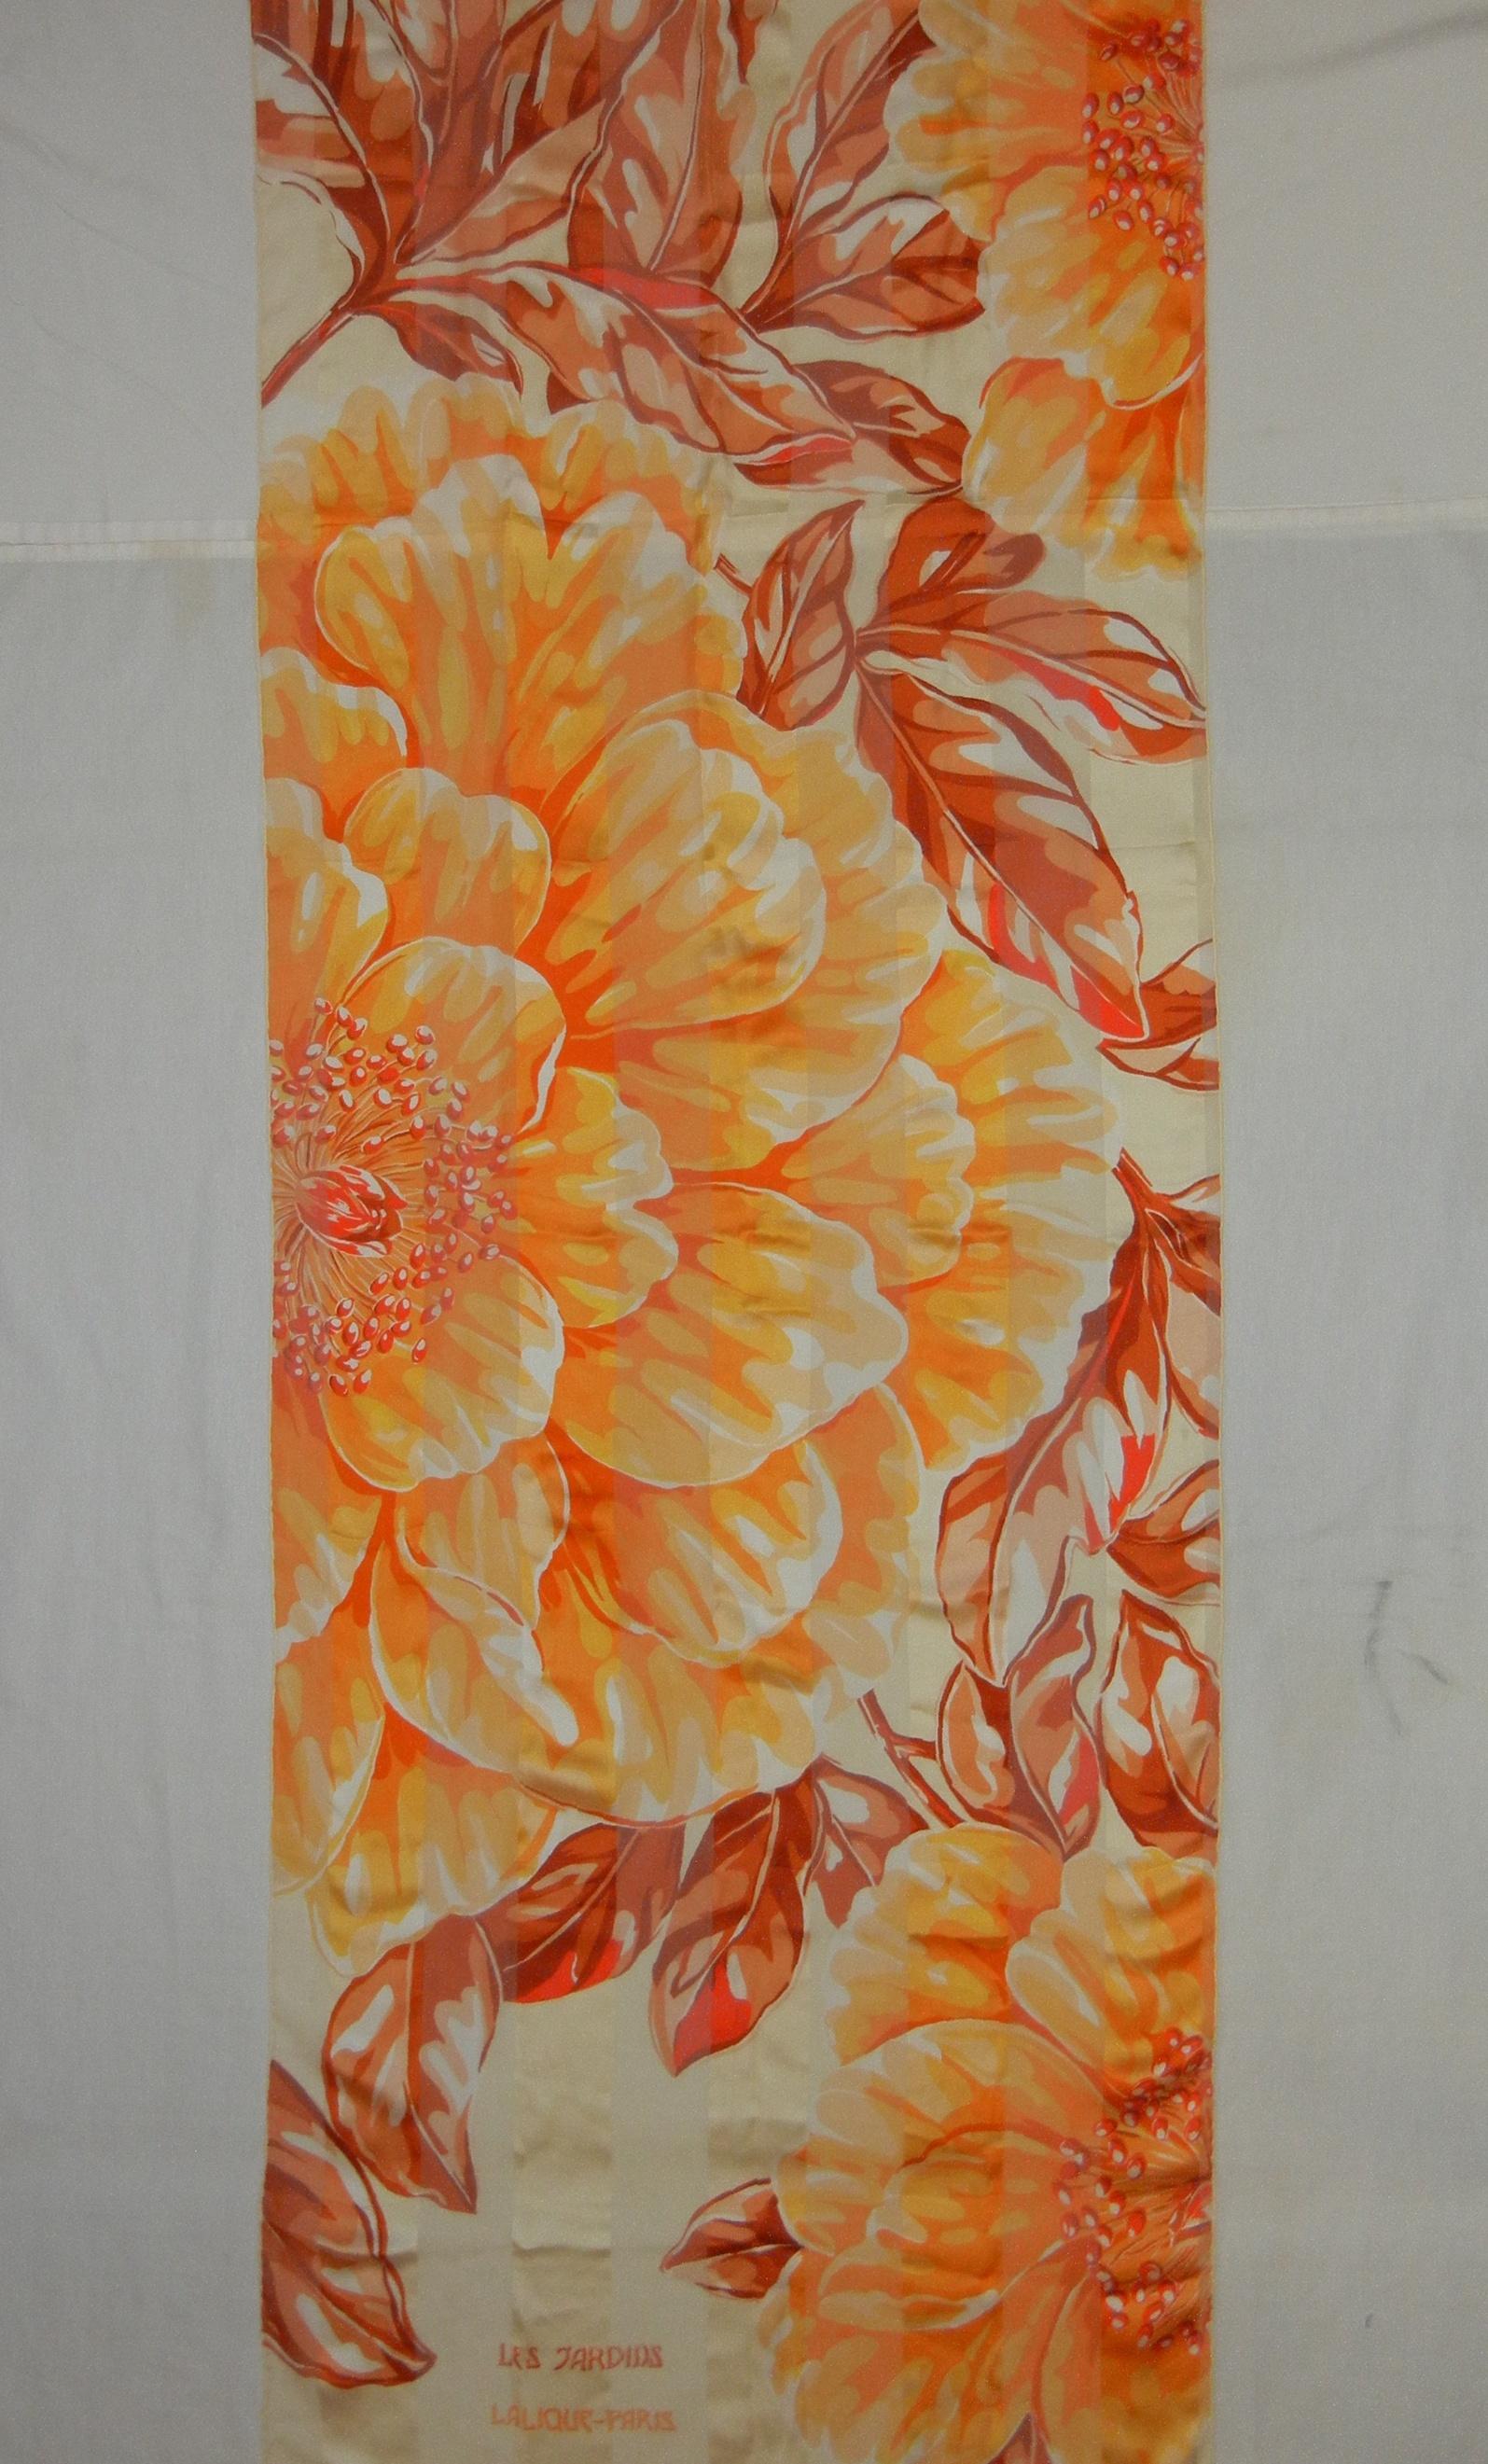 Lalique created this lovely tangerine and ivory Les Jardins see through silk rectangular scarf that can be worn as a stole/shawl on those warmer fall nights.  Large bold tangerine color flowers intertwined with copper tone leaves create a soft